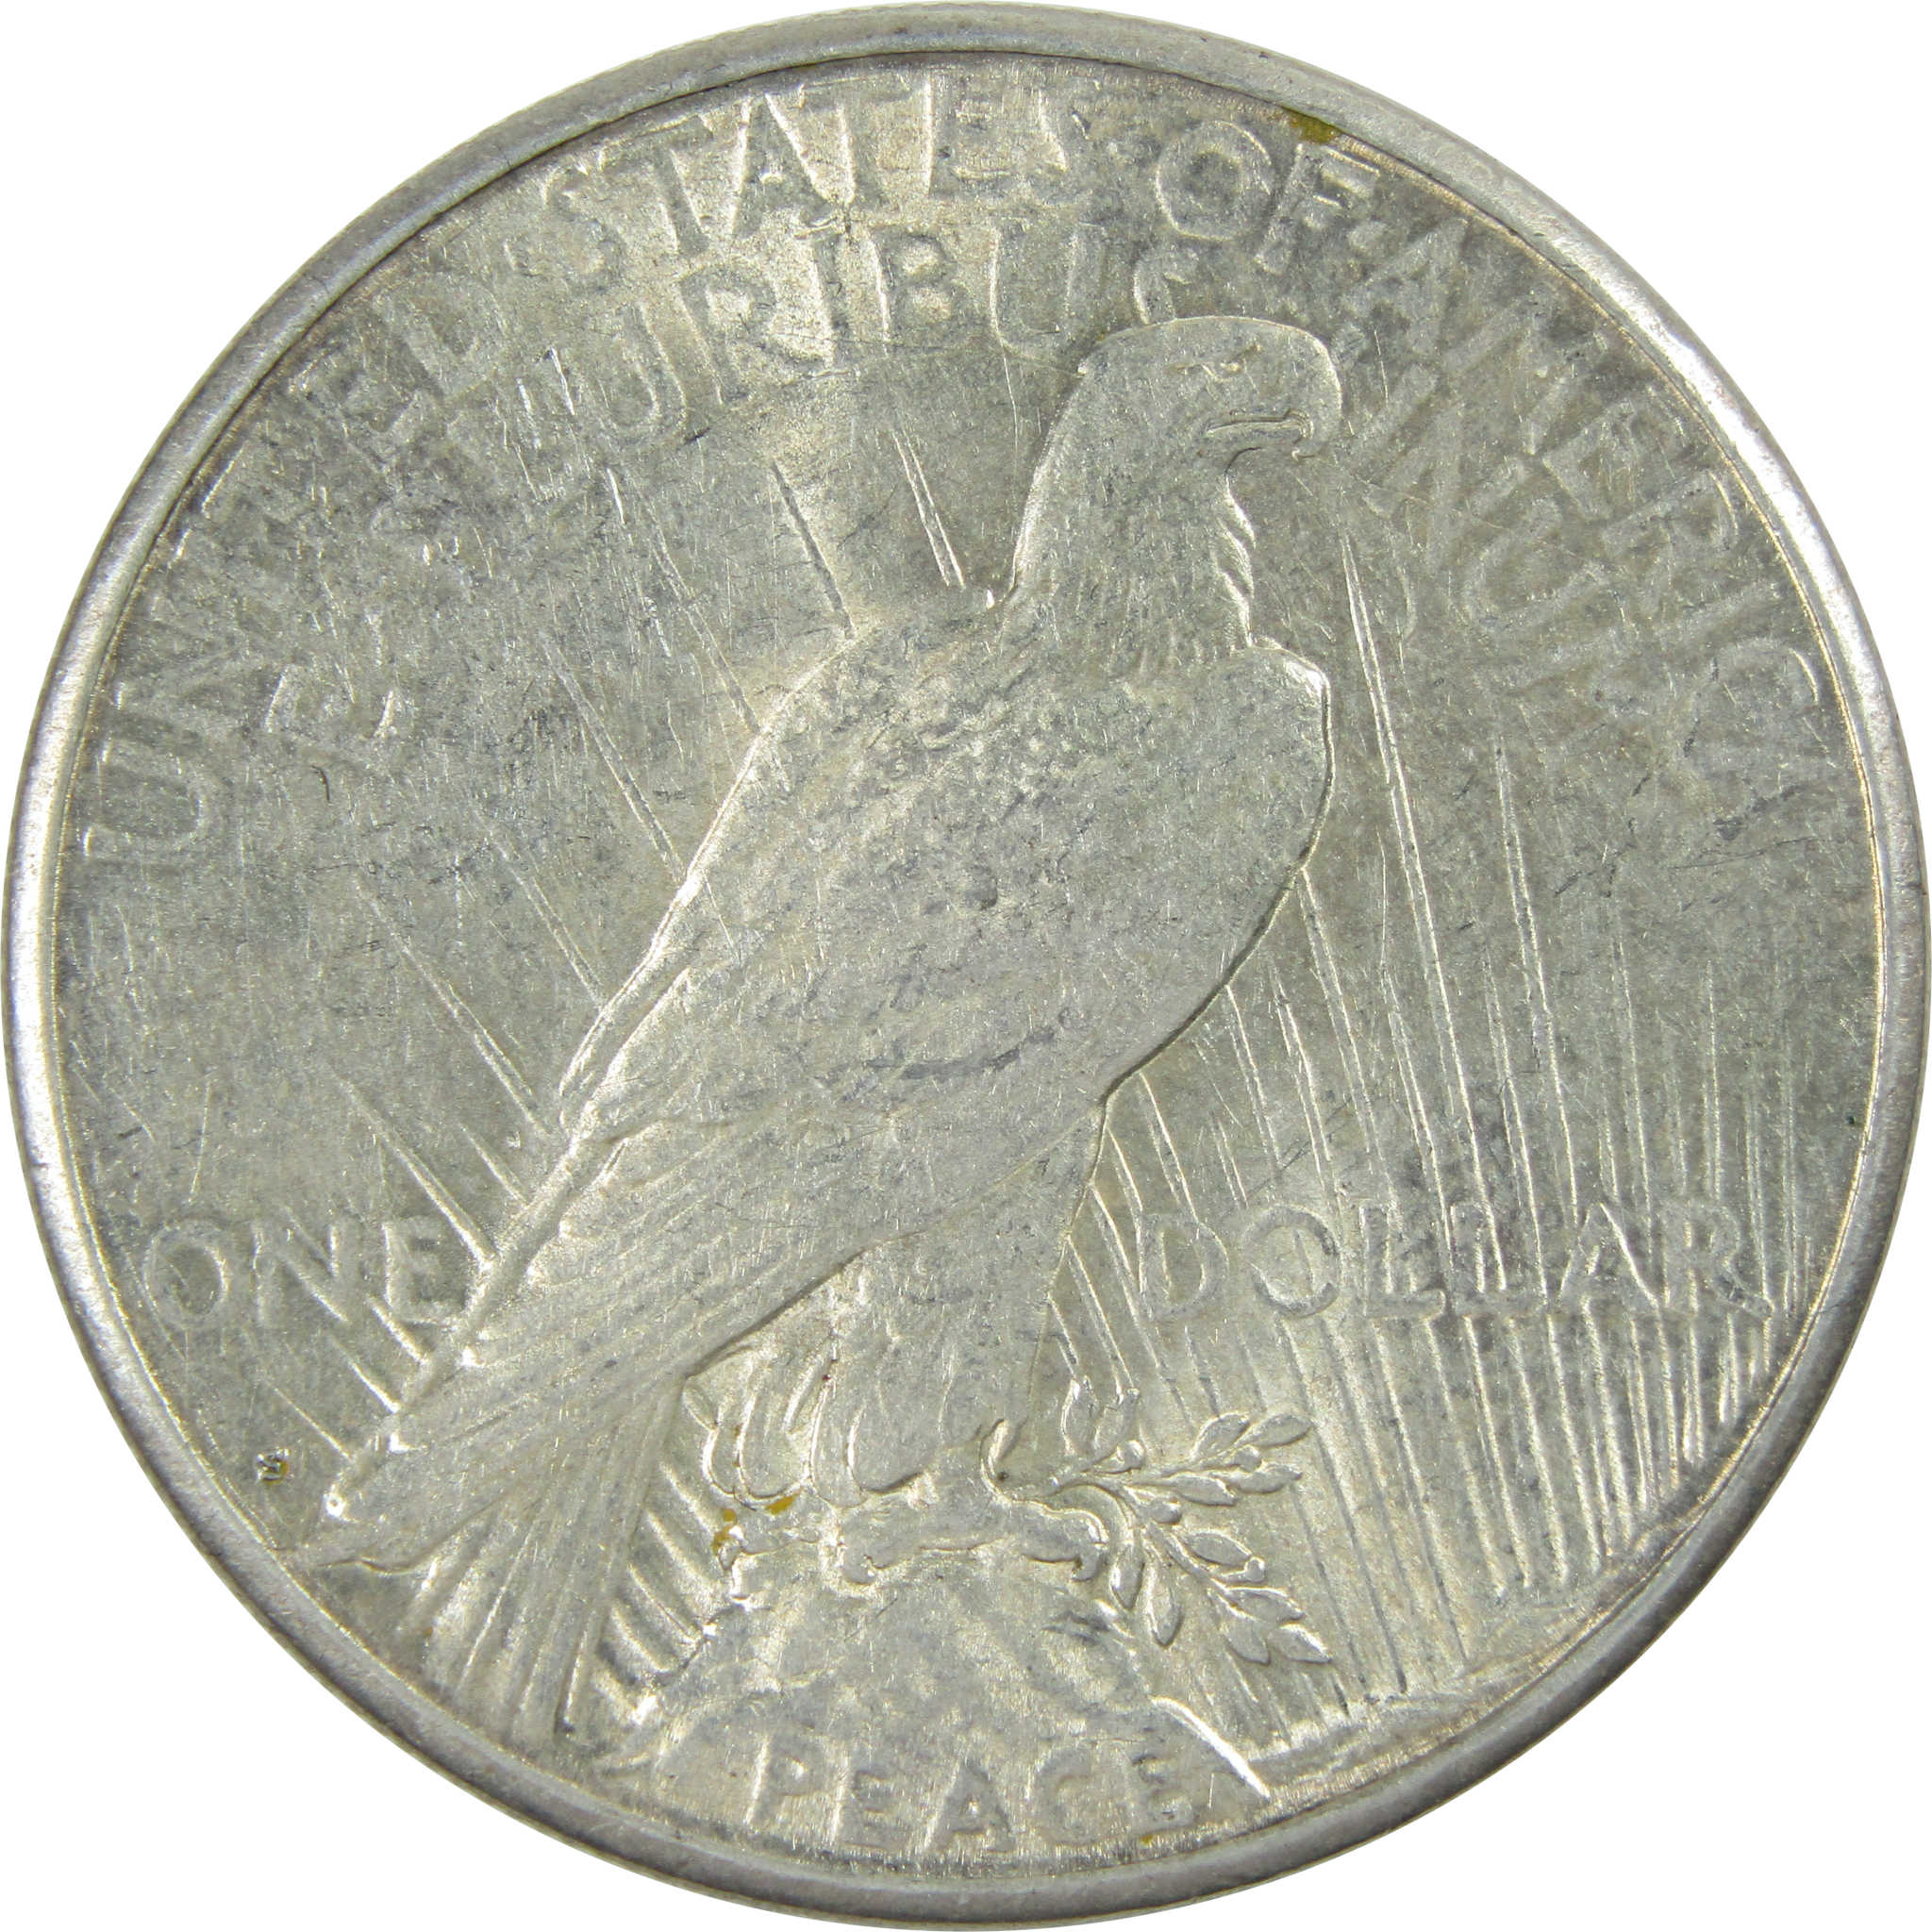 1924 S Peace Dollar AU About Uncirculated Silver $1 Coin SKU:I13684